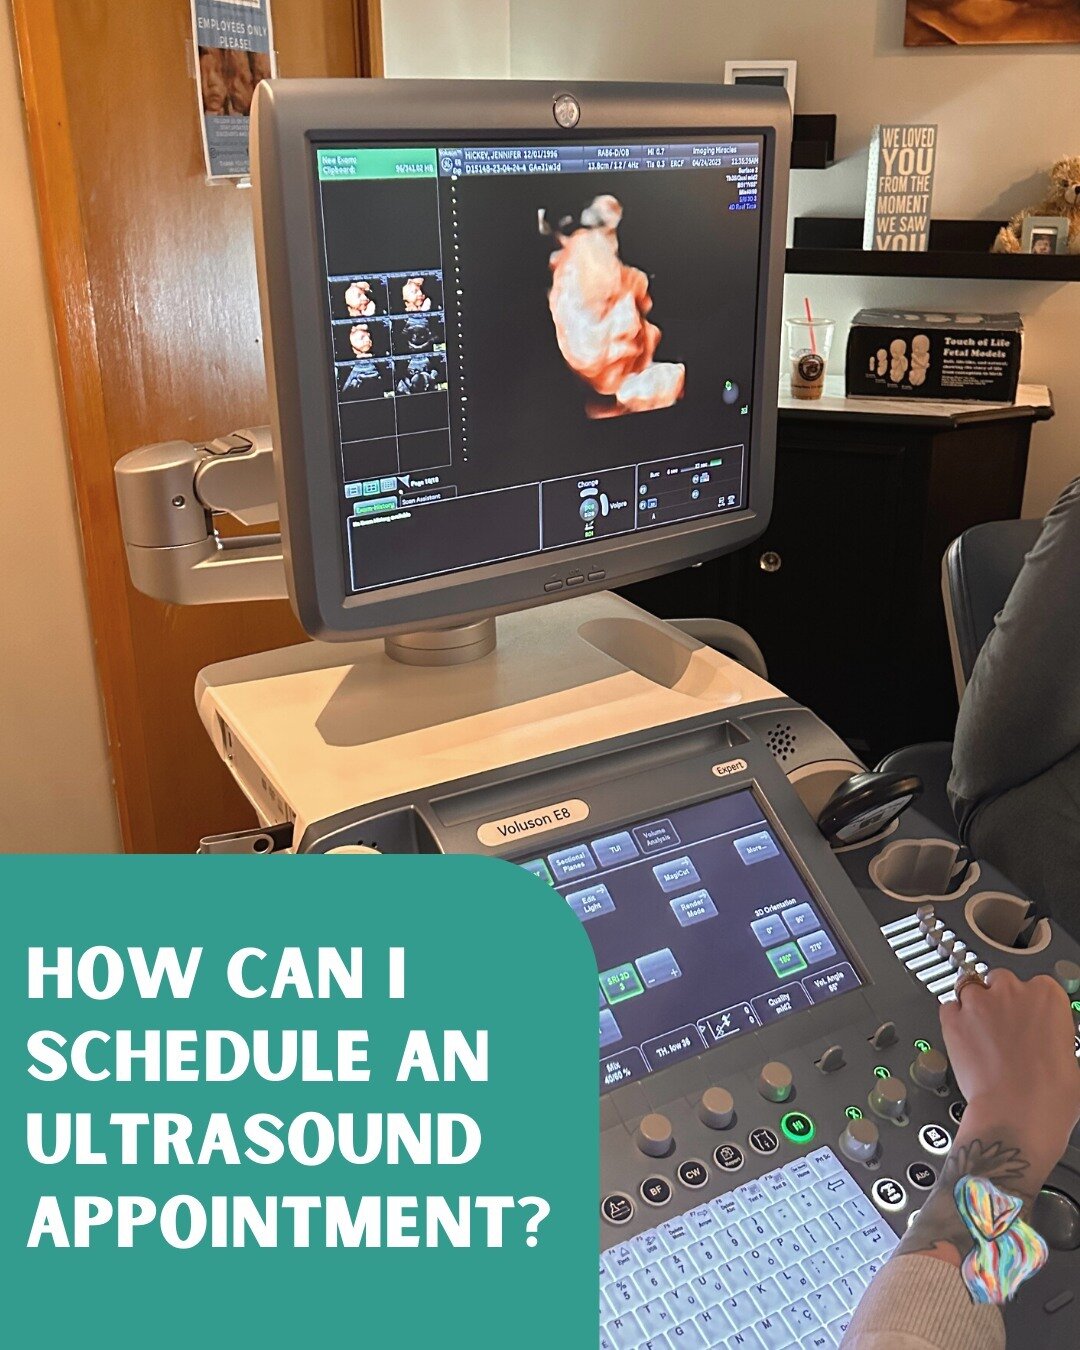 At Life Meant to Life, we provide the opportunity to have a positive and memorable ultrasound experience with your baby. During a terminal diagnosis, clinics tend to be cold. We highlight the positives of pregnancy and the beautiful parts of your bab